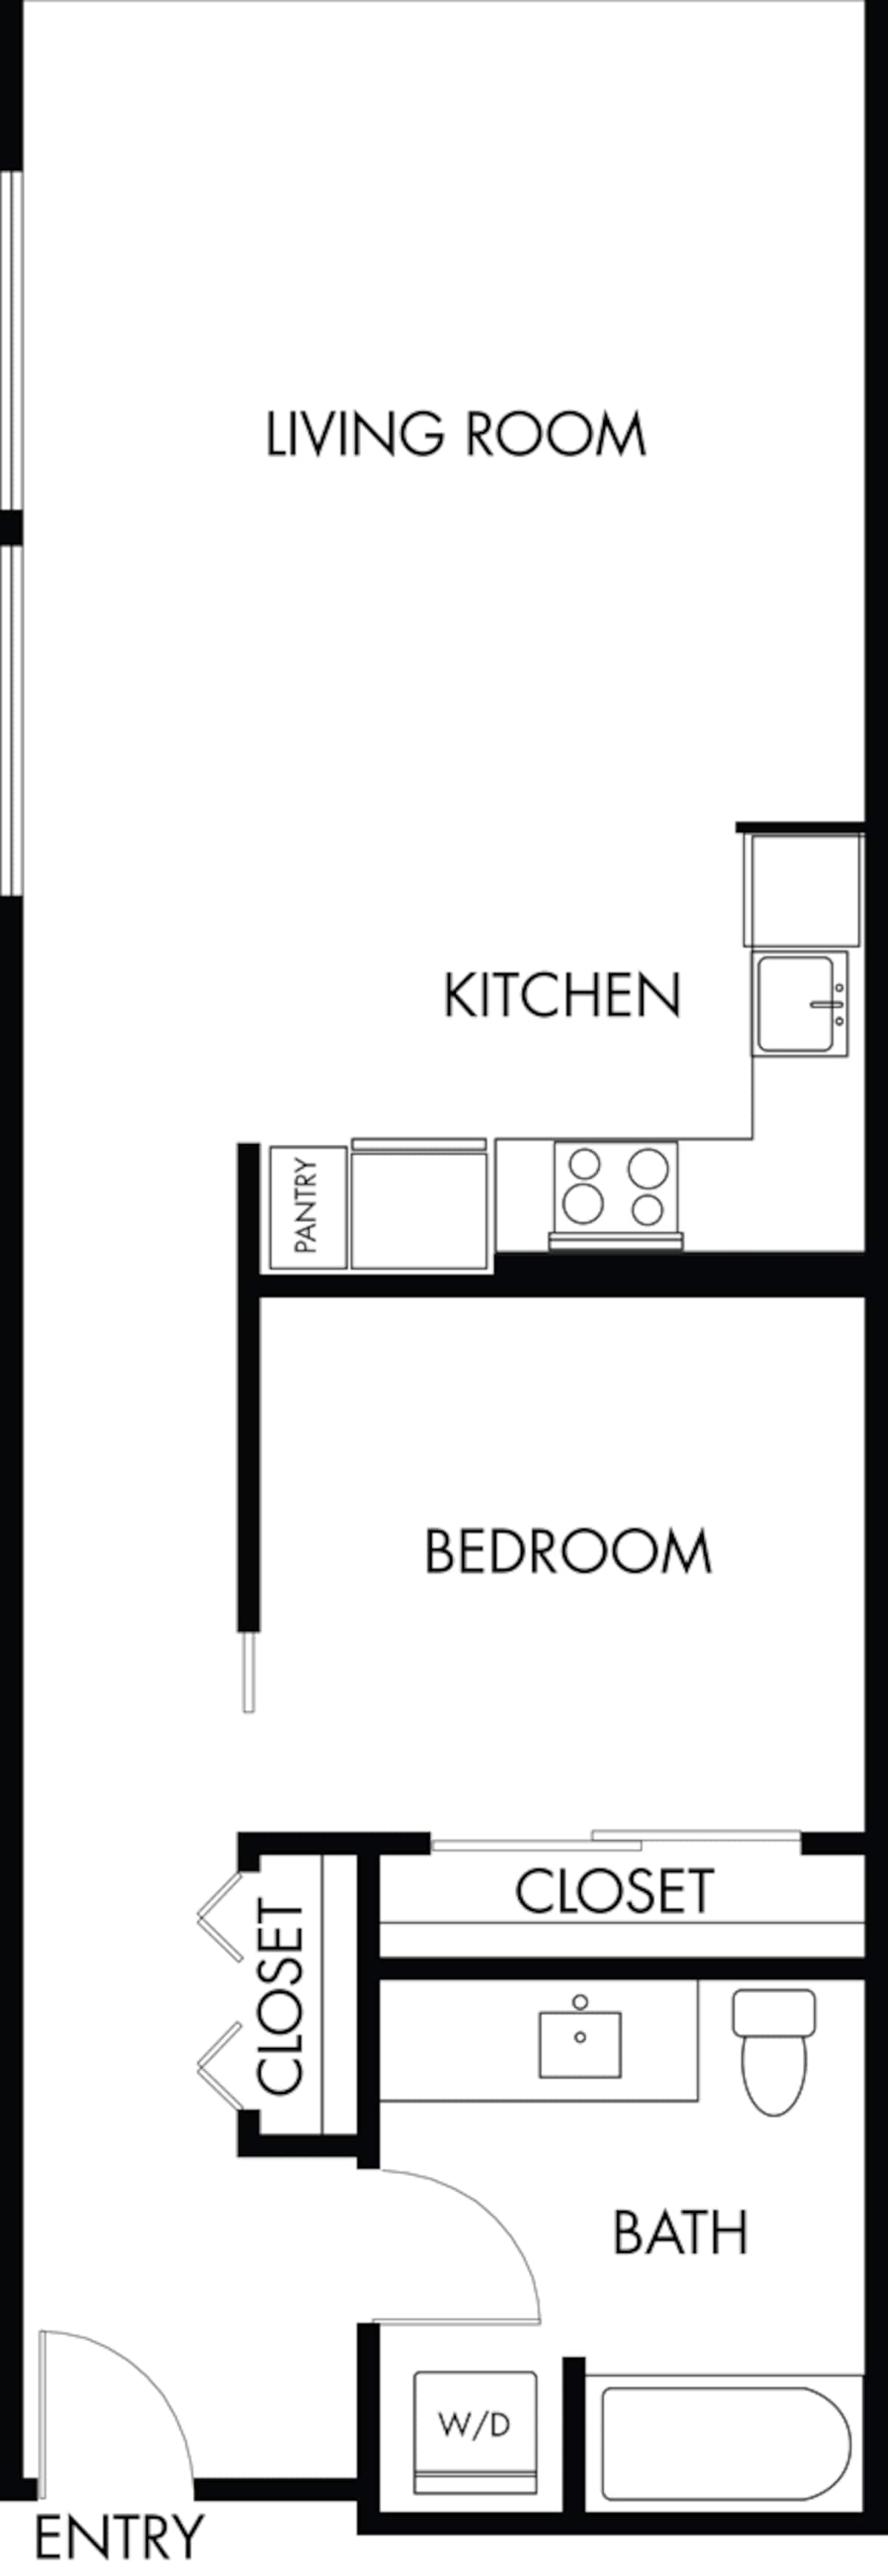 Floorplan diagram for O1.2 Type A, showing 1 bedroom